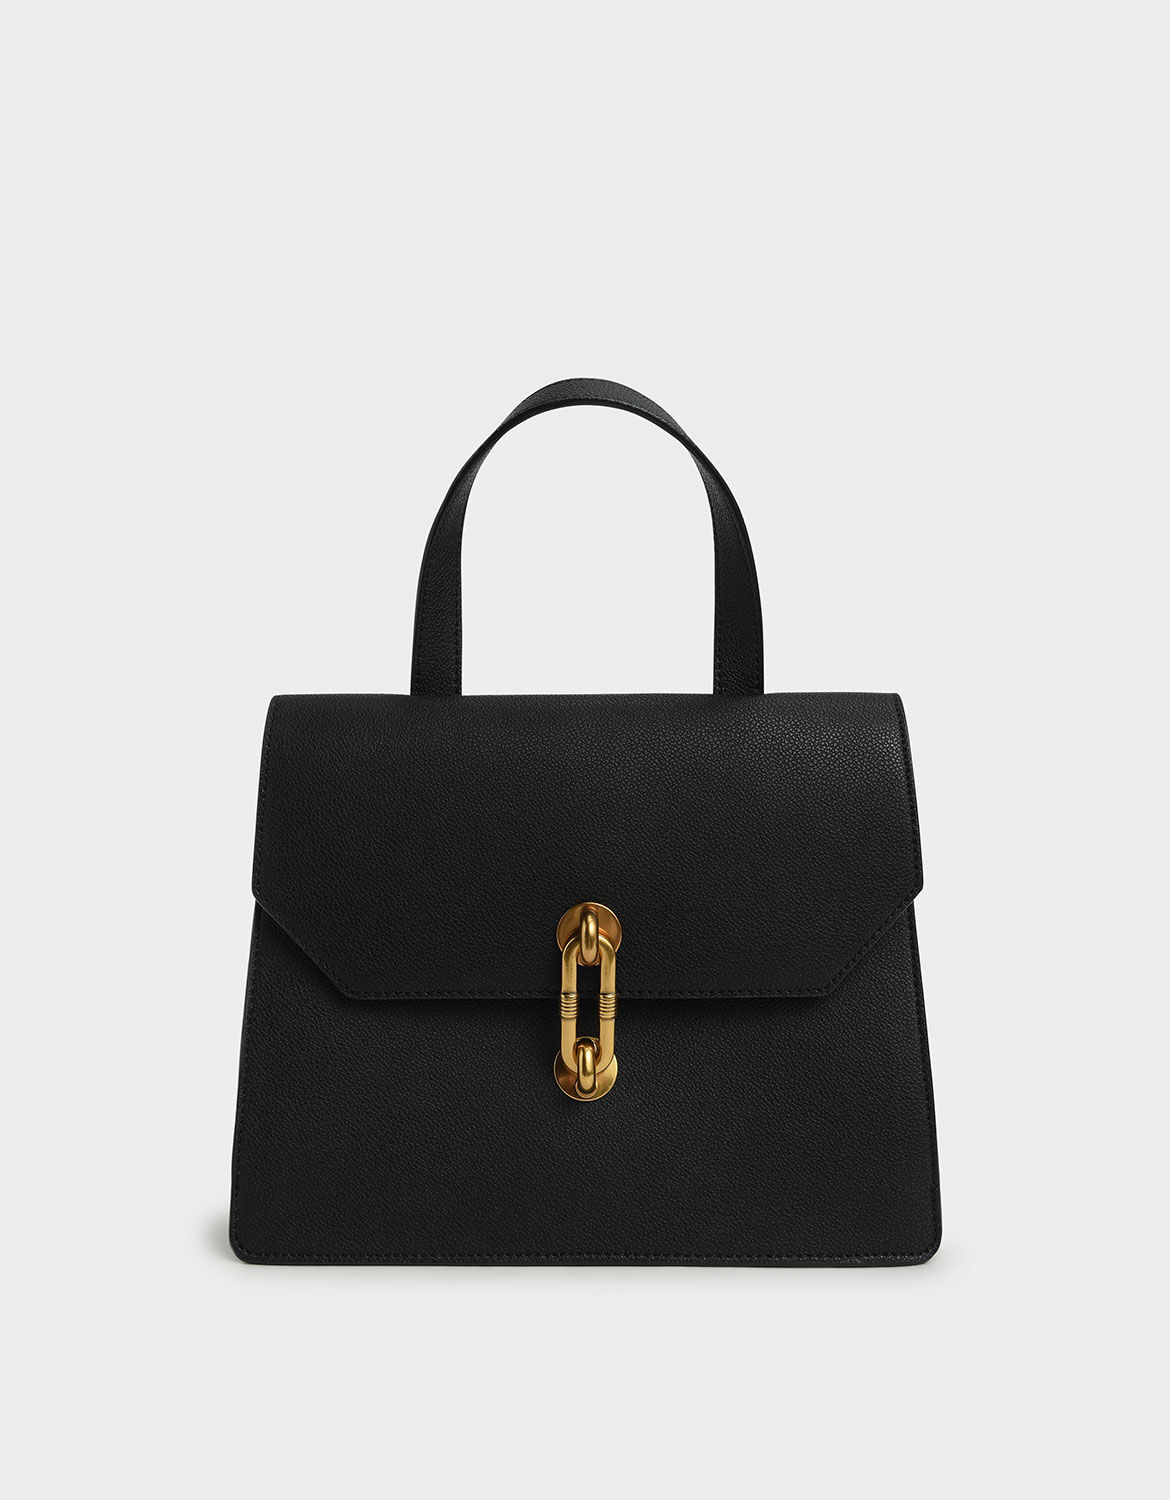 Shop Women’s Bags Online - CHARLES & KEITH NL